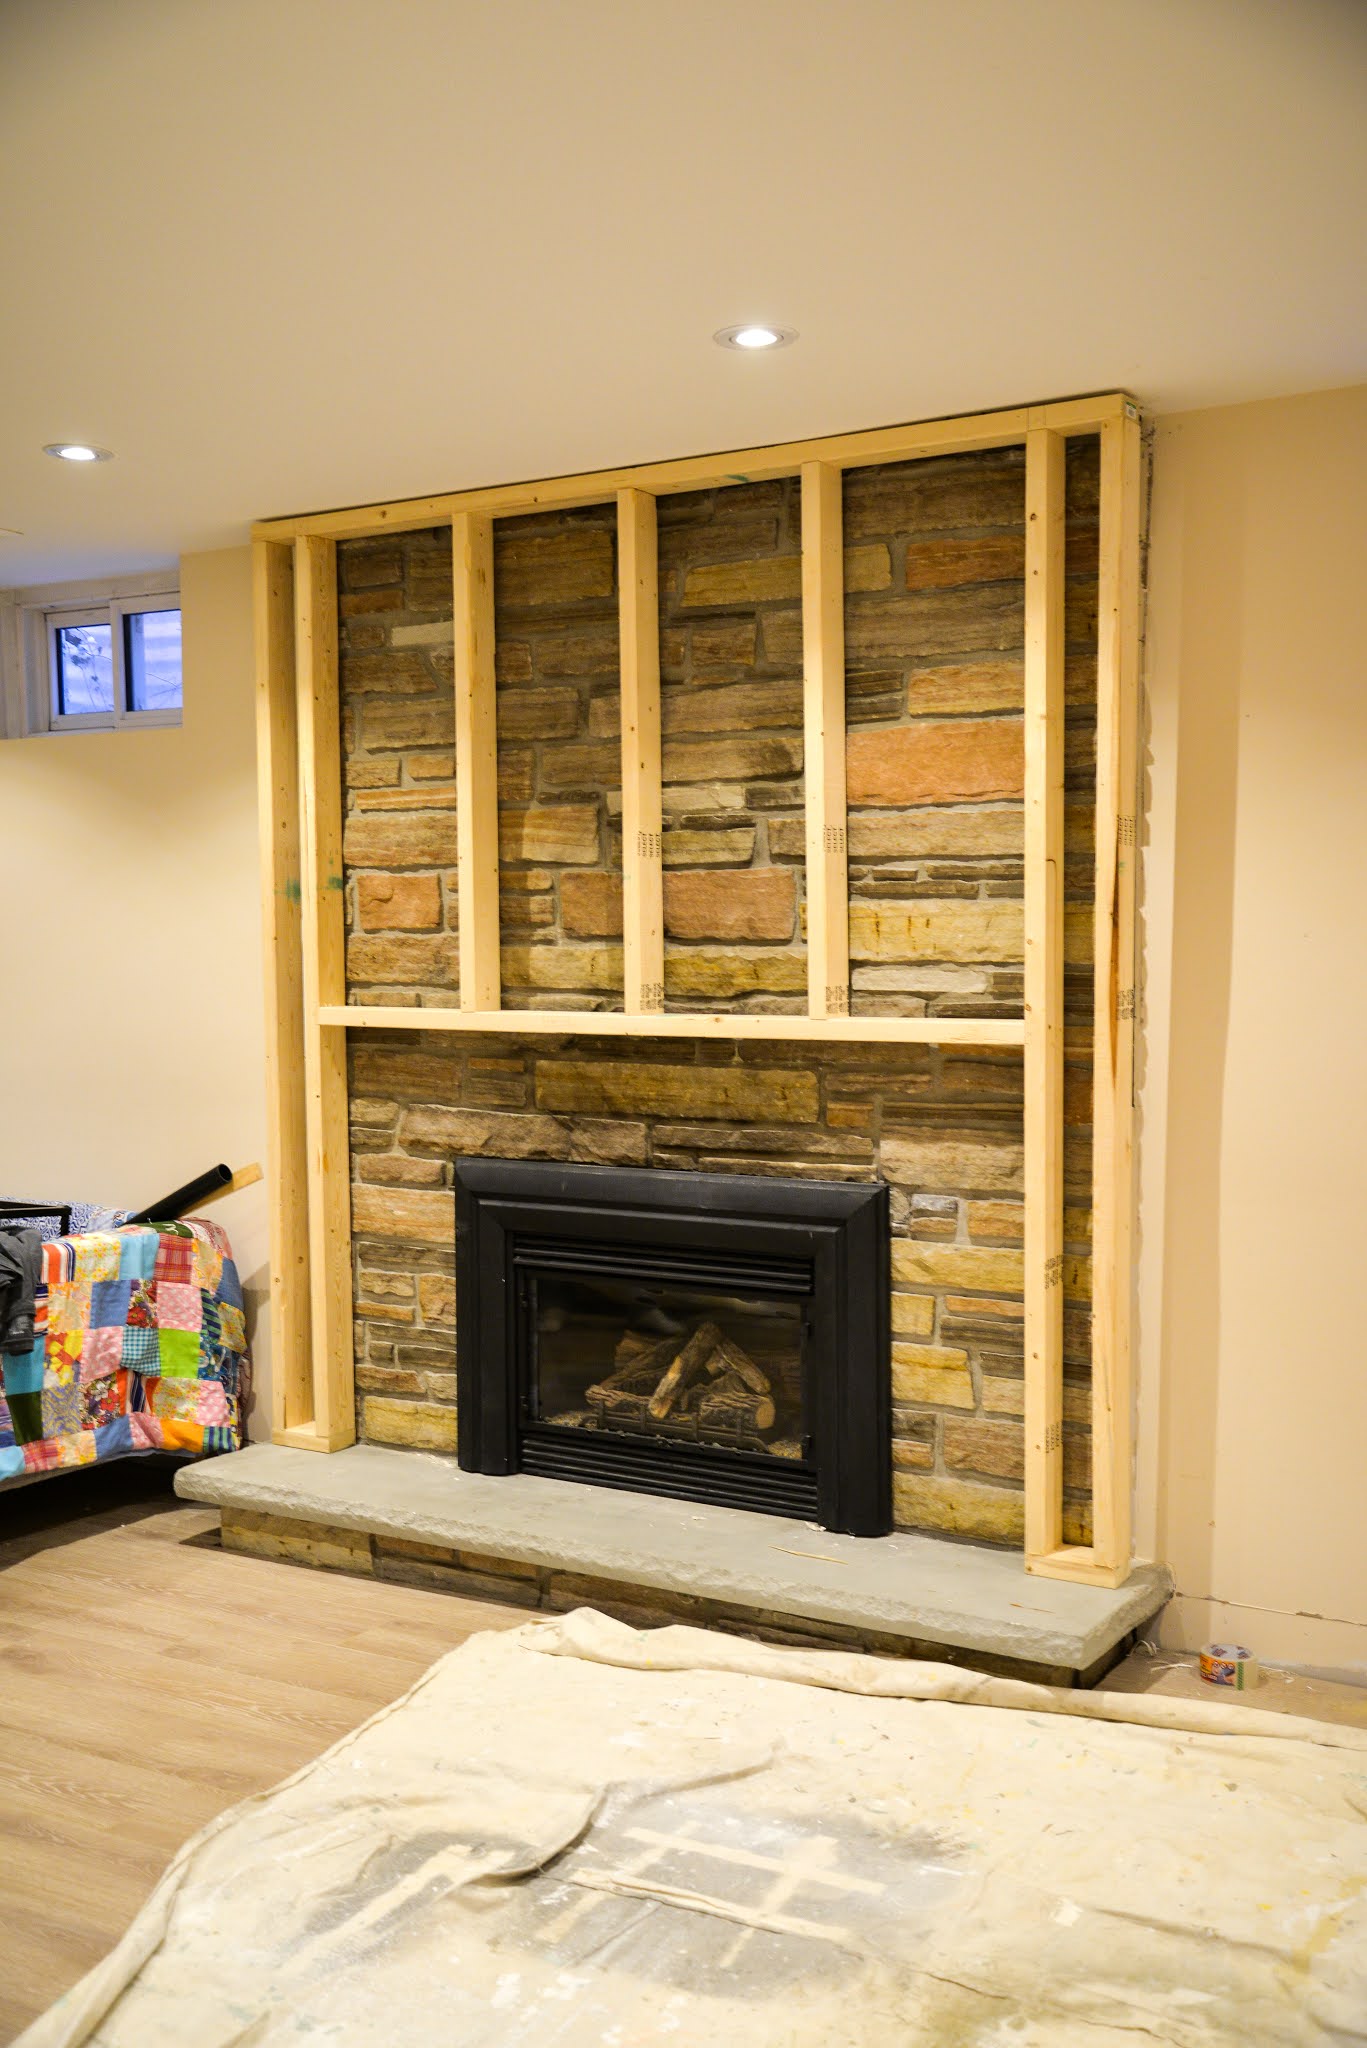 How To Update A Stone Fireplace, Stone Wall Fireplace Makeover